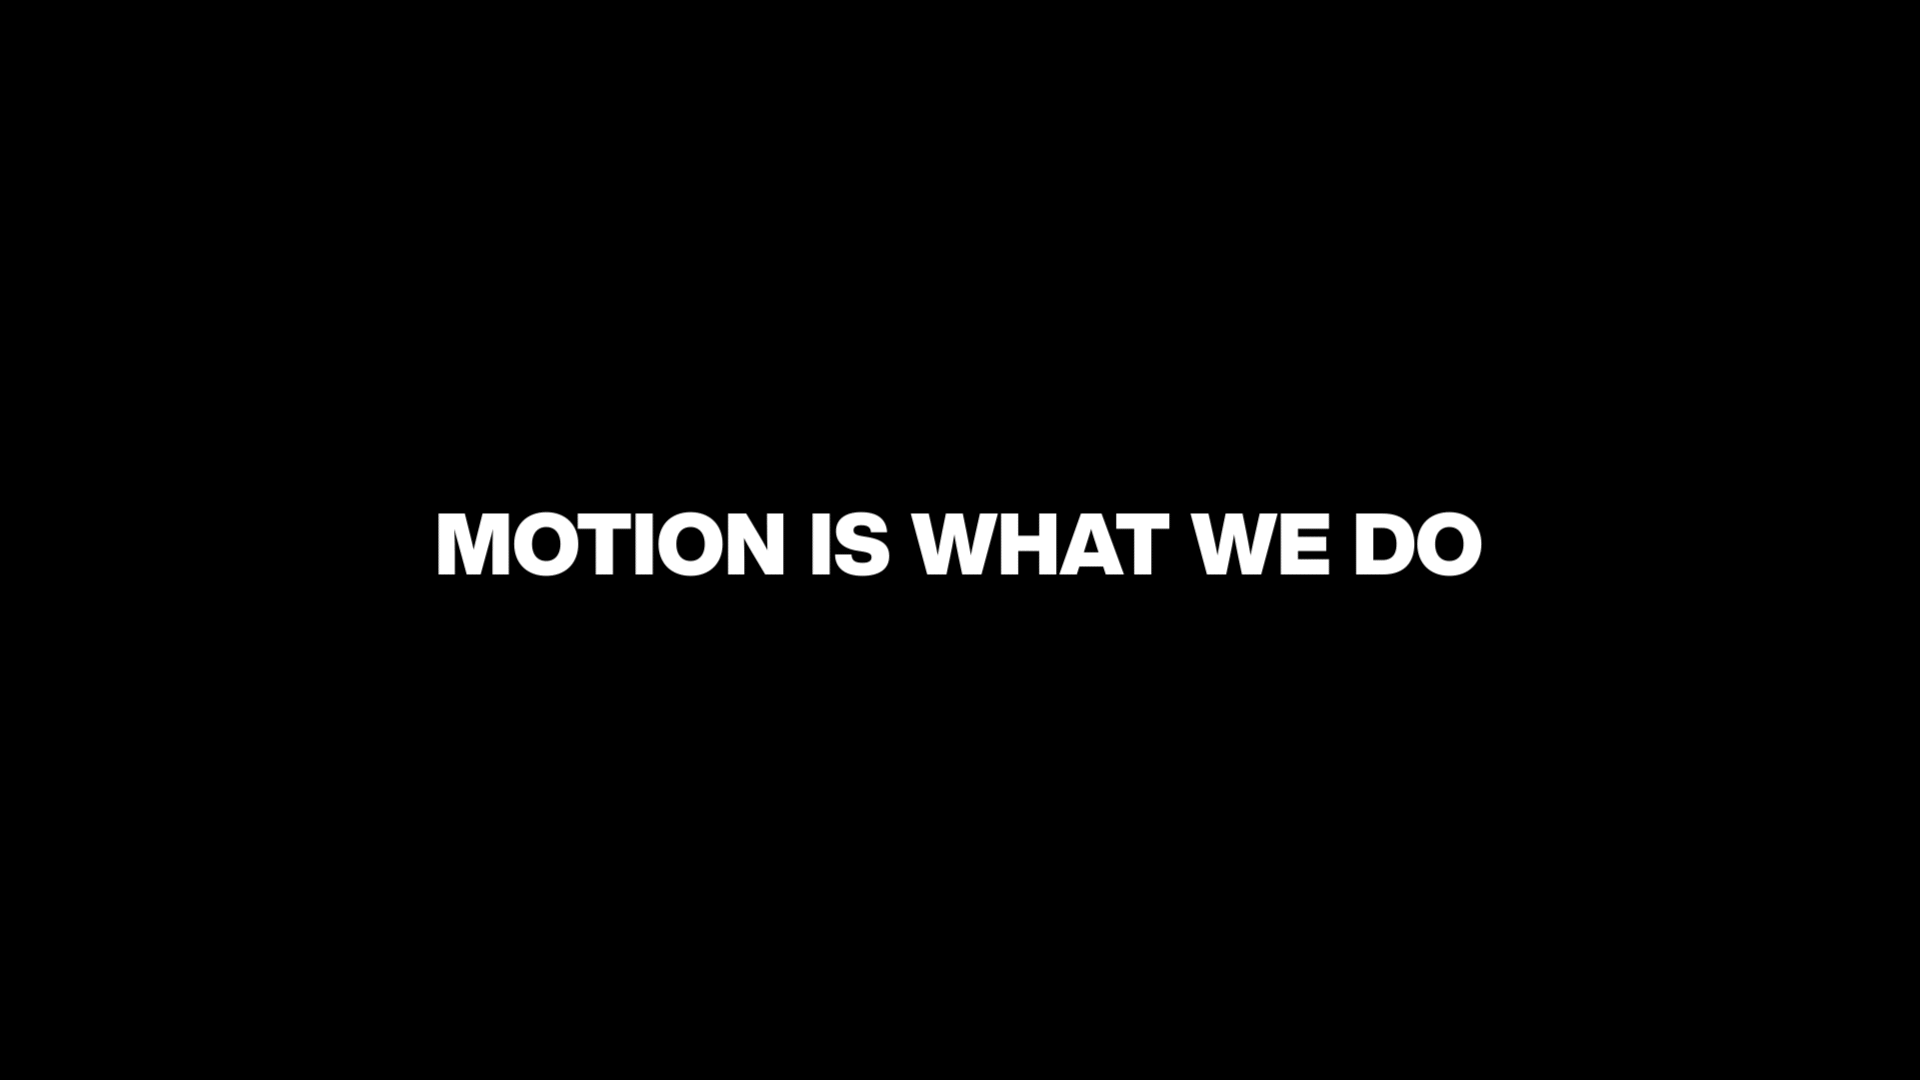 21t© | Motion is what we do after effects animation brand identity branding messaging motion motion graphics slogan tone type animation voice